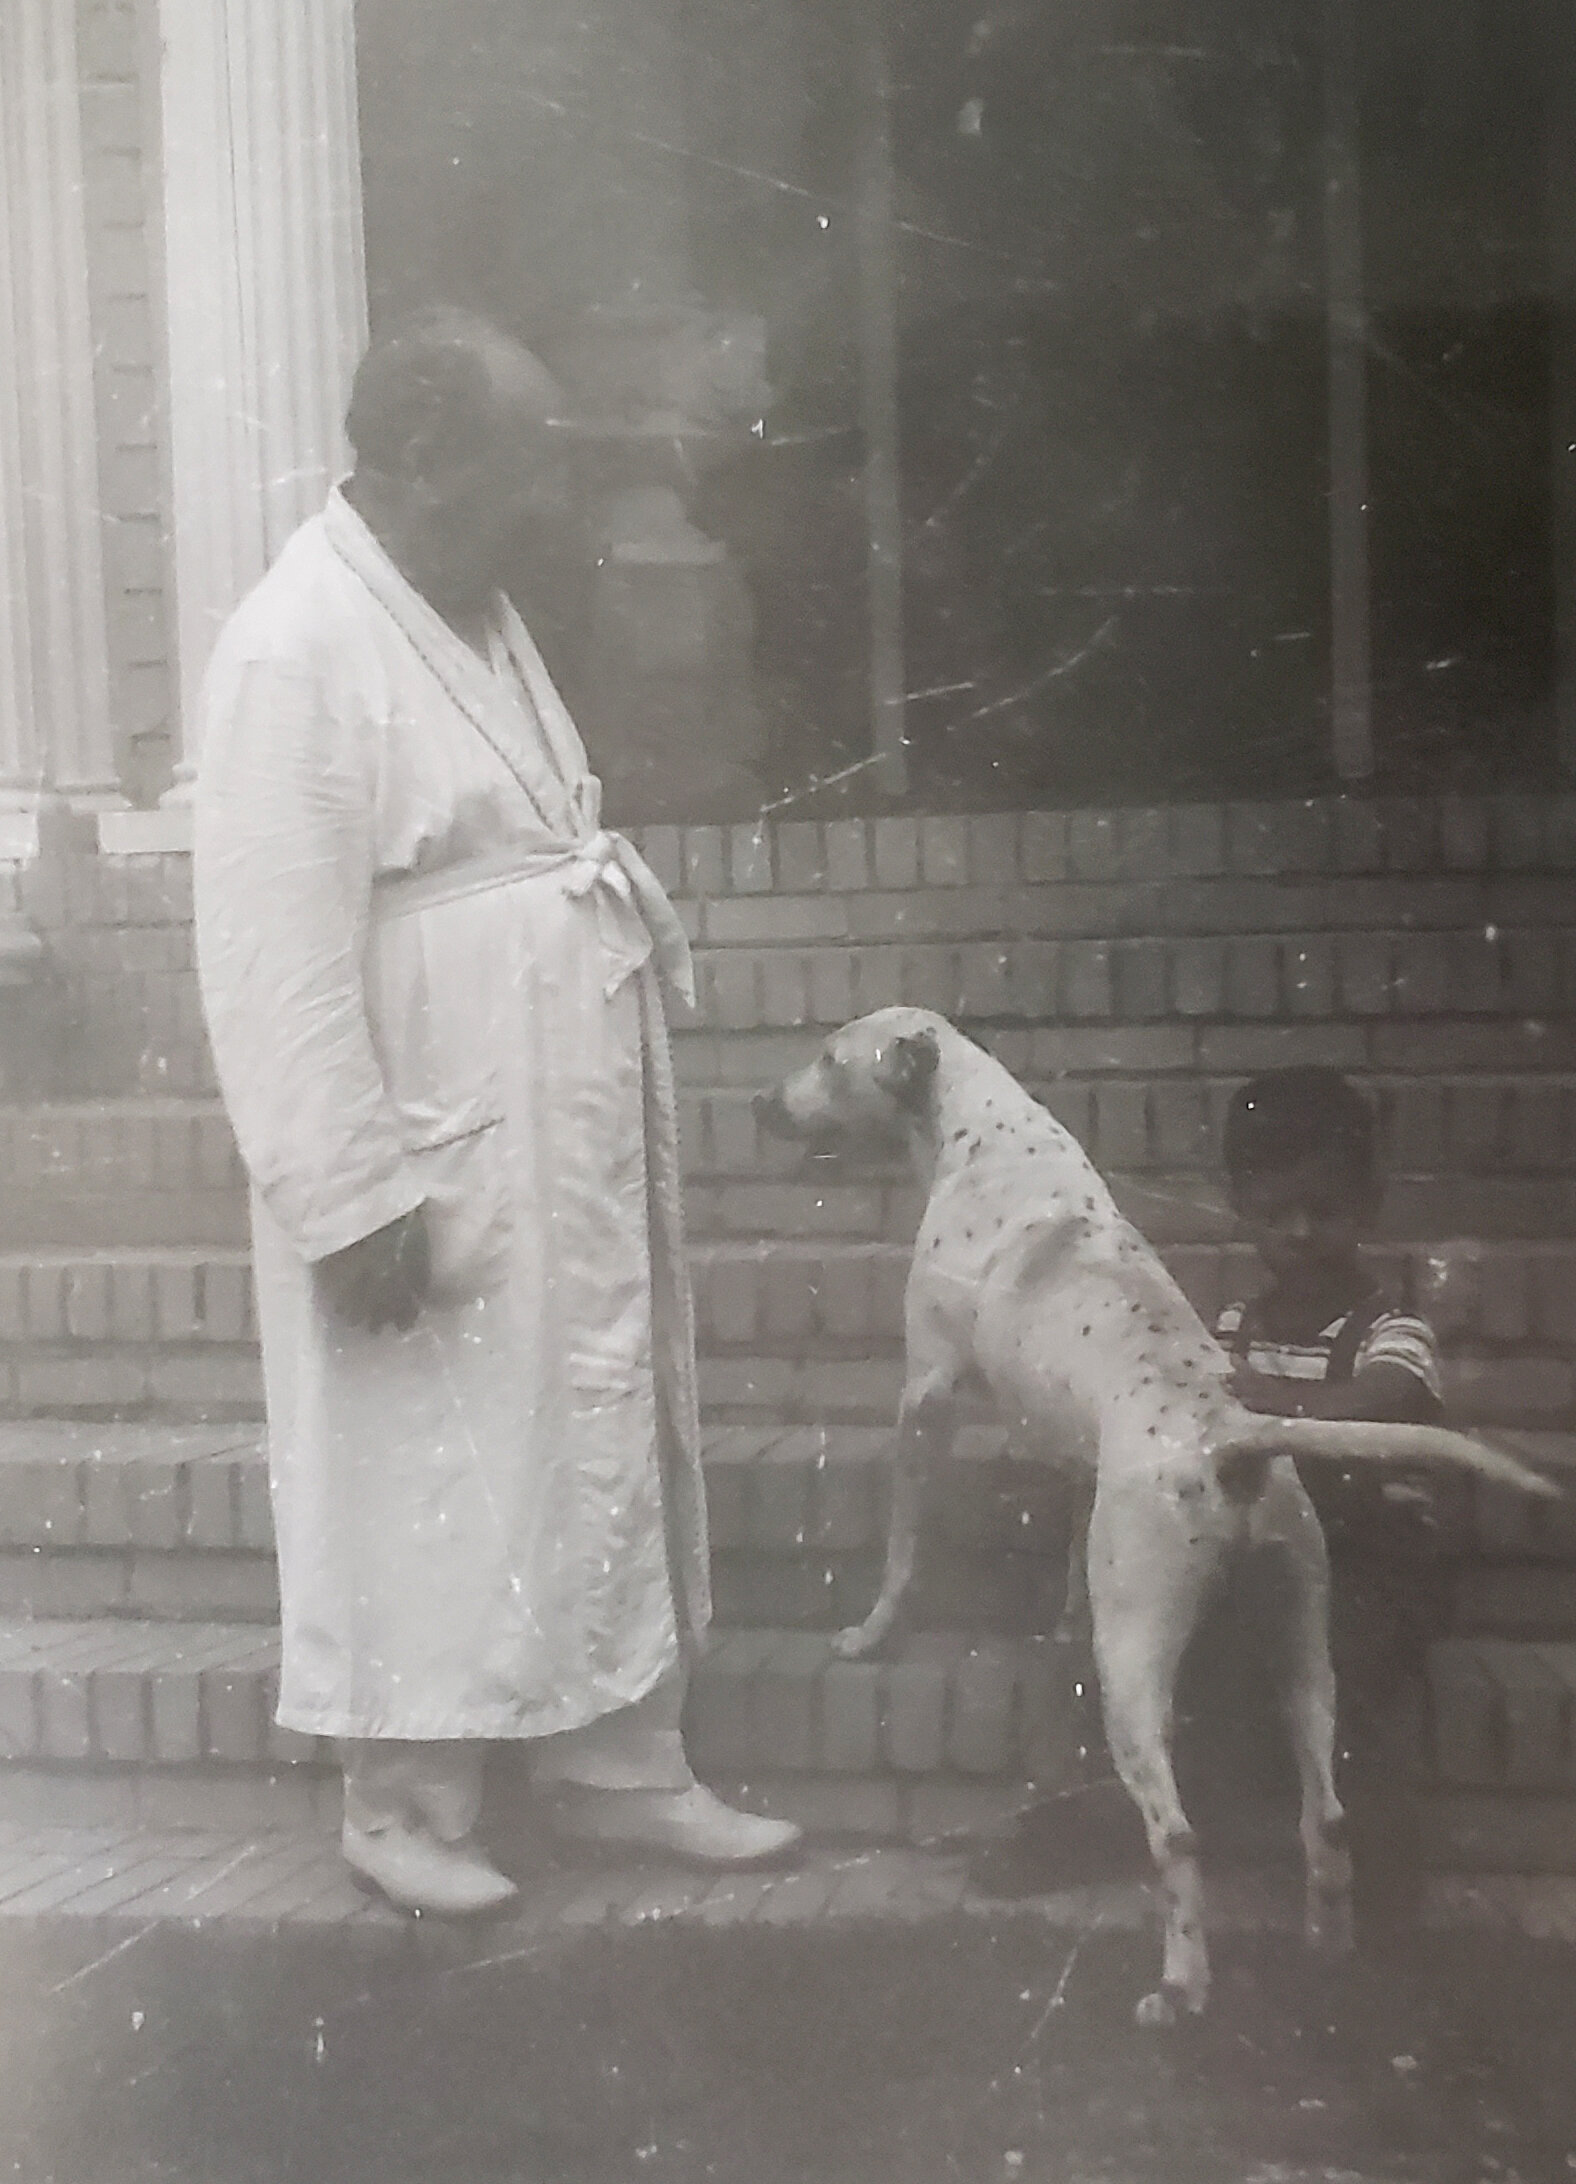 Amedeo in his robe with his dog